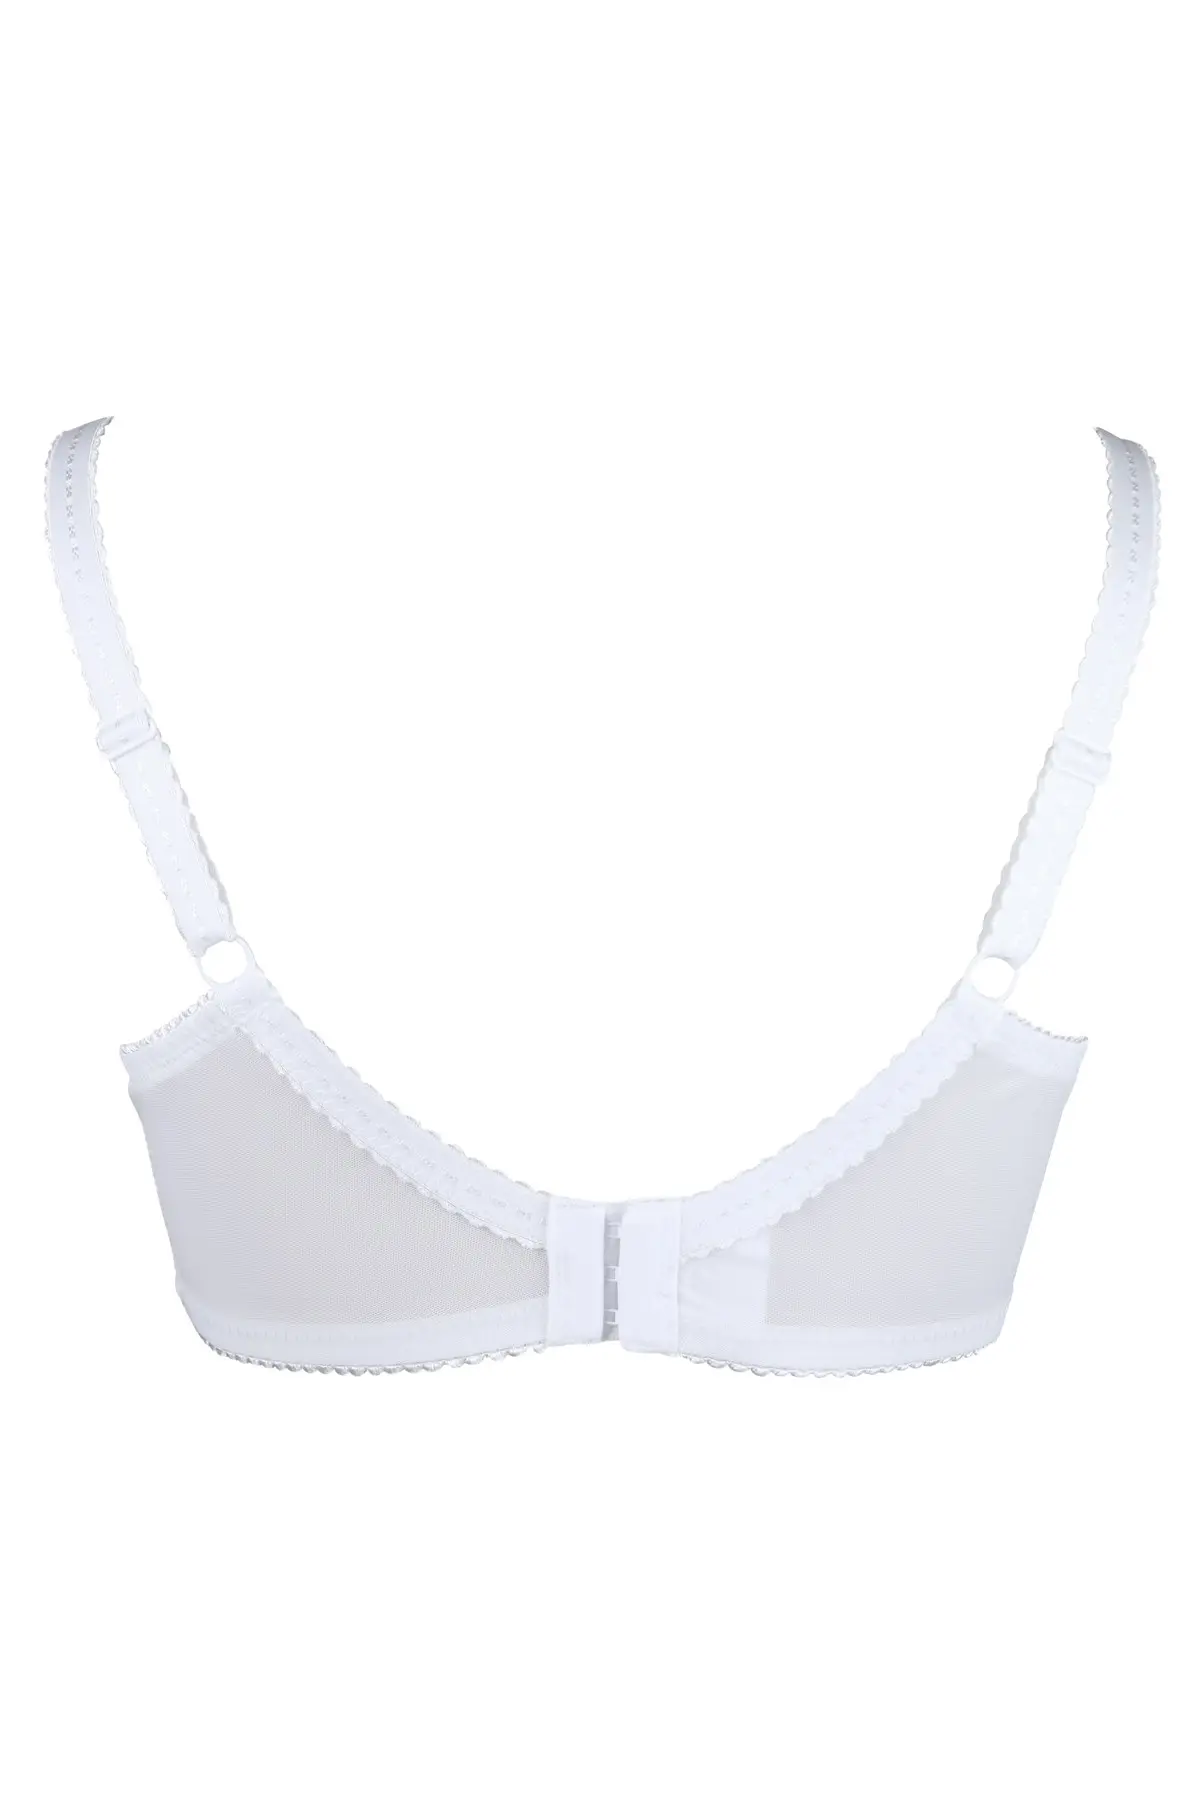 French Lace U Shaped Invisible Lift Up Bra And Lingerie Set With Non Rims  And Hidden Backless Design For Women Wire Free Invisible Lift Up Brassiere  Q0705 From Wangxf_321, $23.83